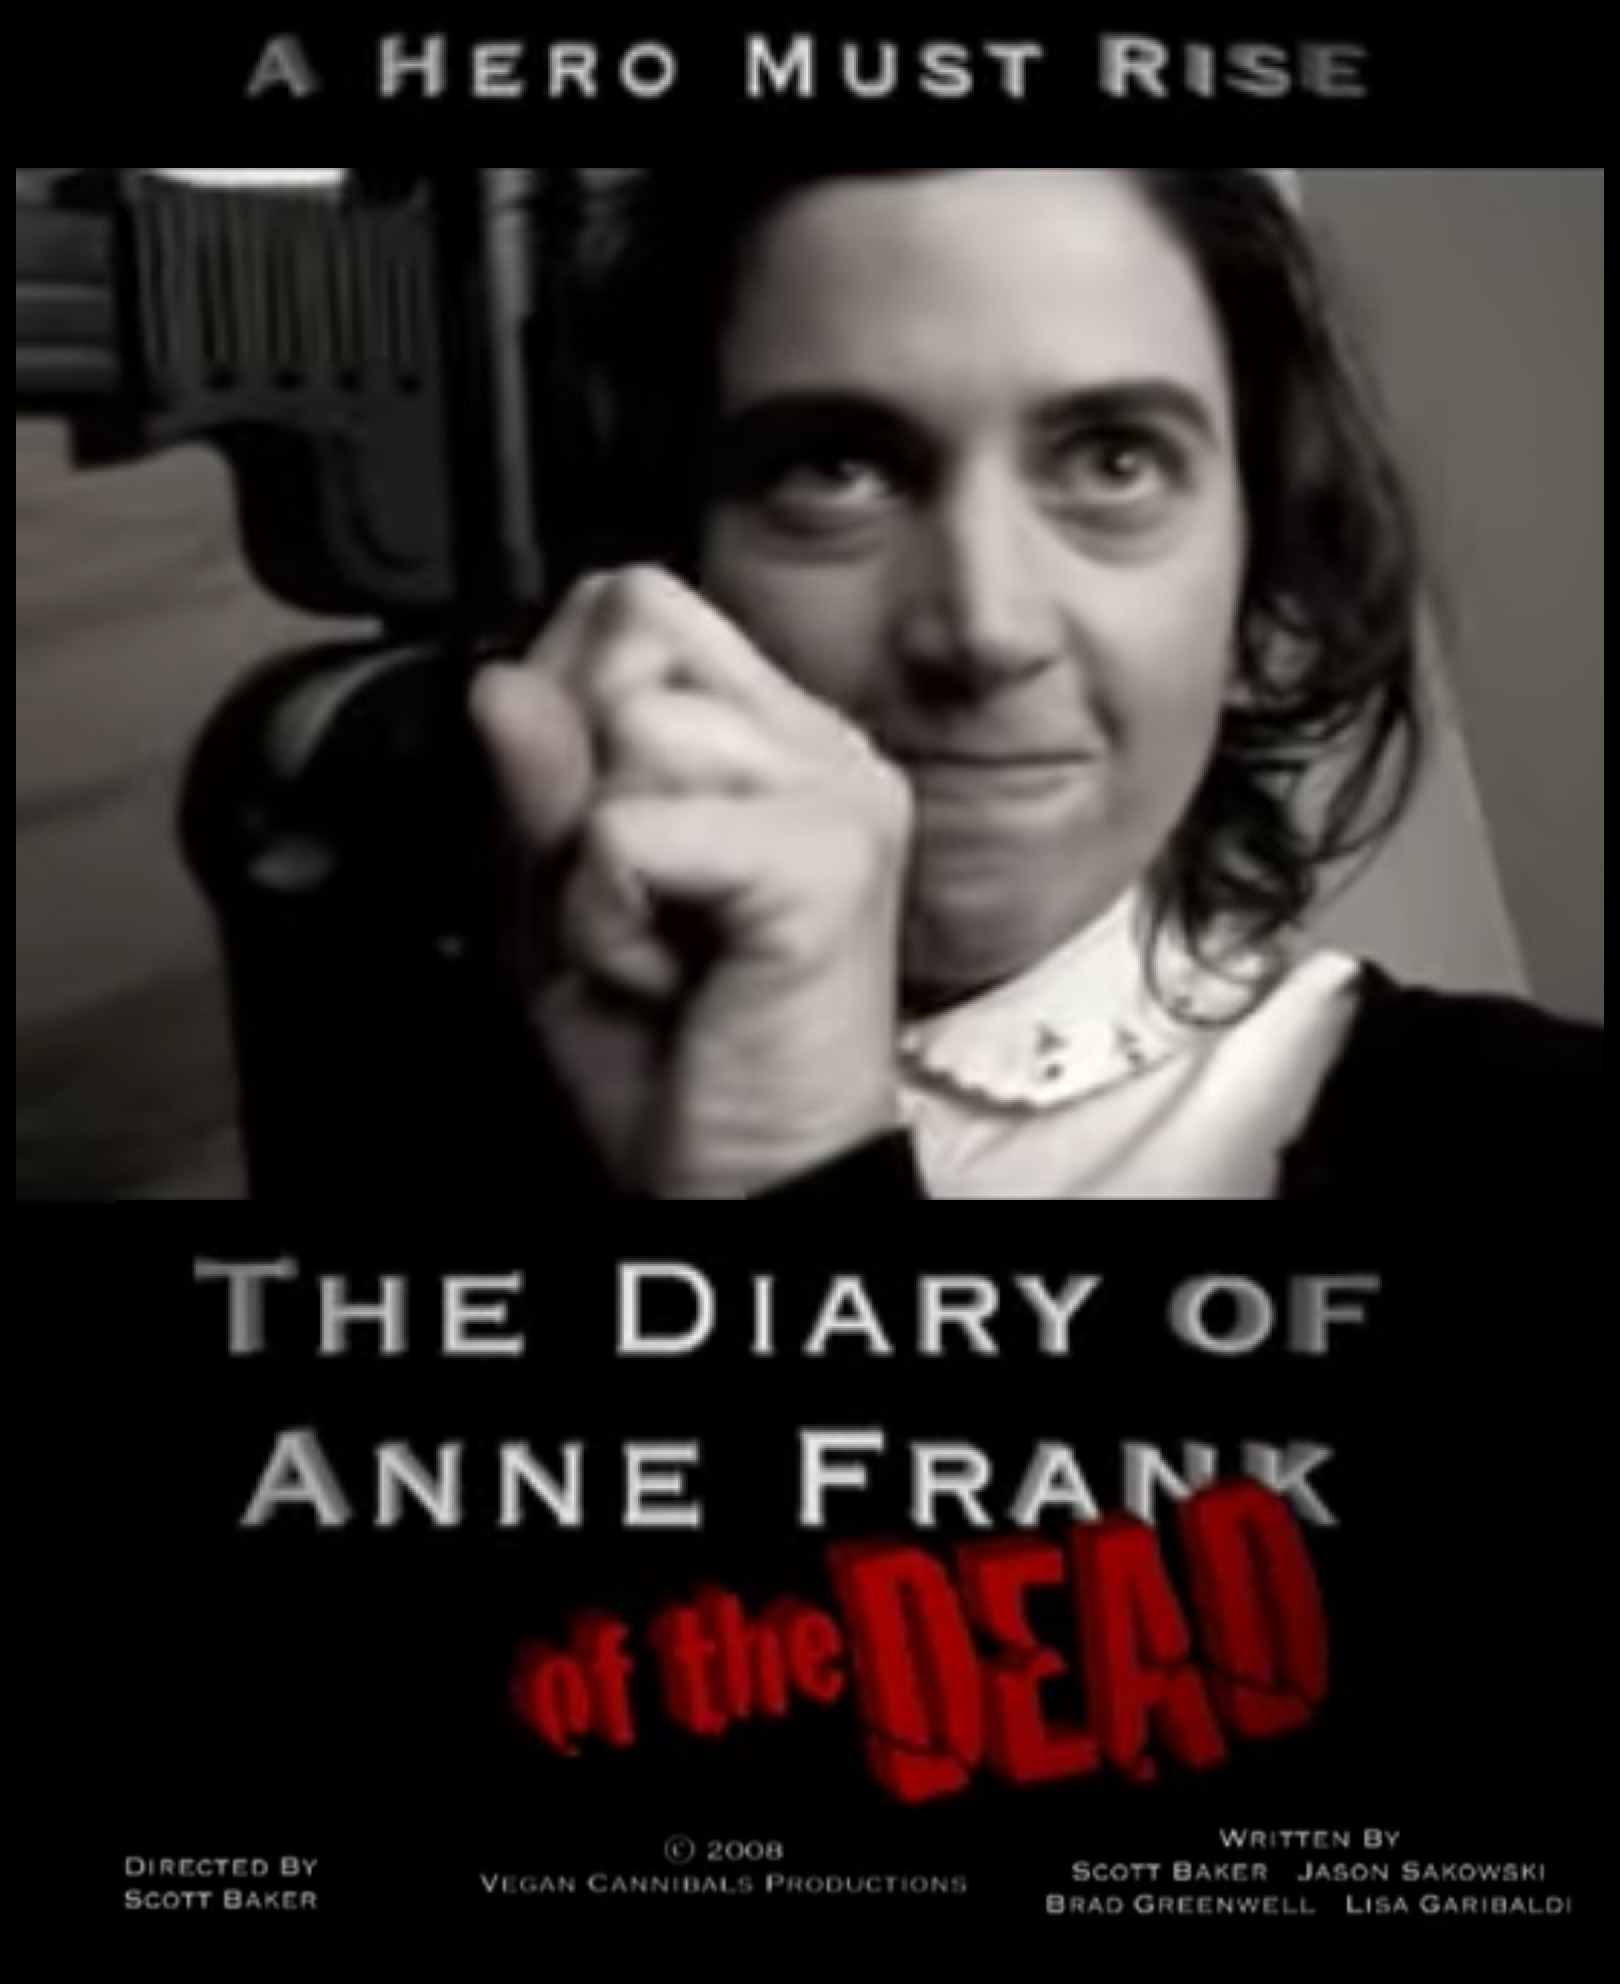 The Diary of Anne Frank of the Dead